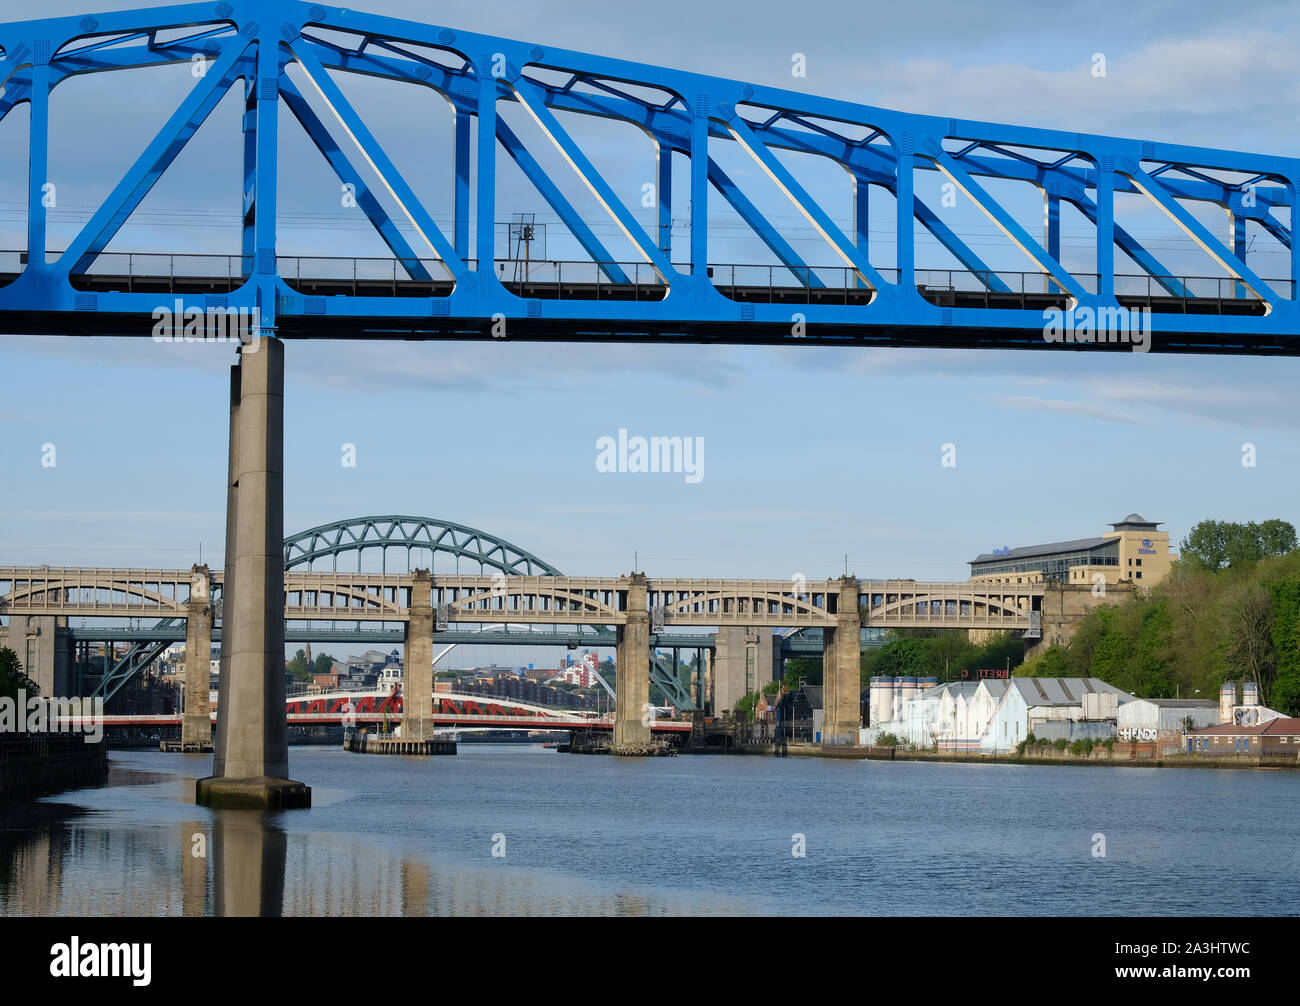 Bridges on the River Tyne at Newcastle-upon-Tyne, with Queen Elizabeth II Bridge in the foreground Stock Photo